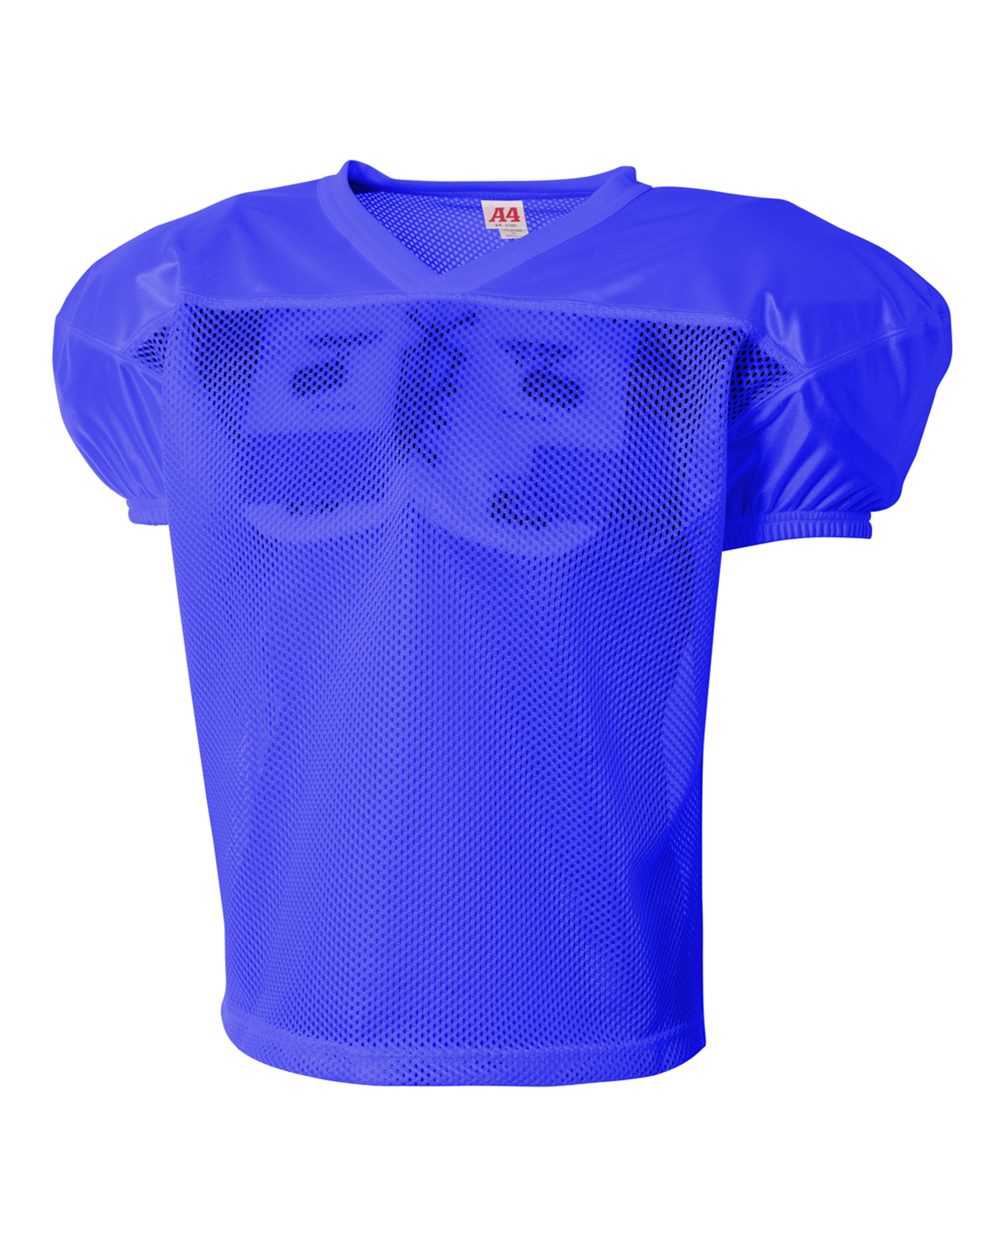 A4 NB4260 Youth Drills Practice Jersey - Royal - HIT a Double